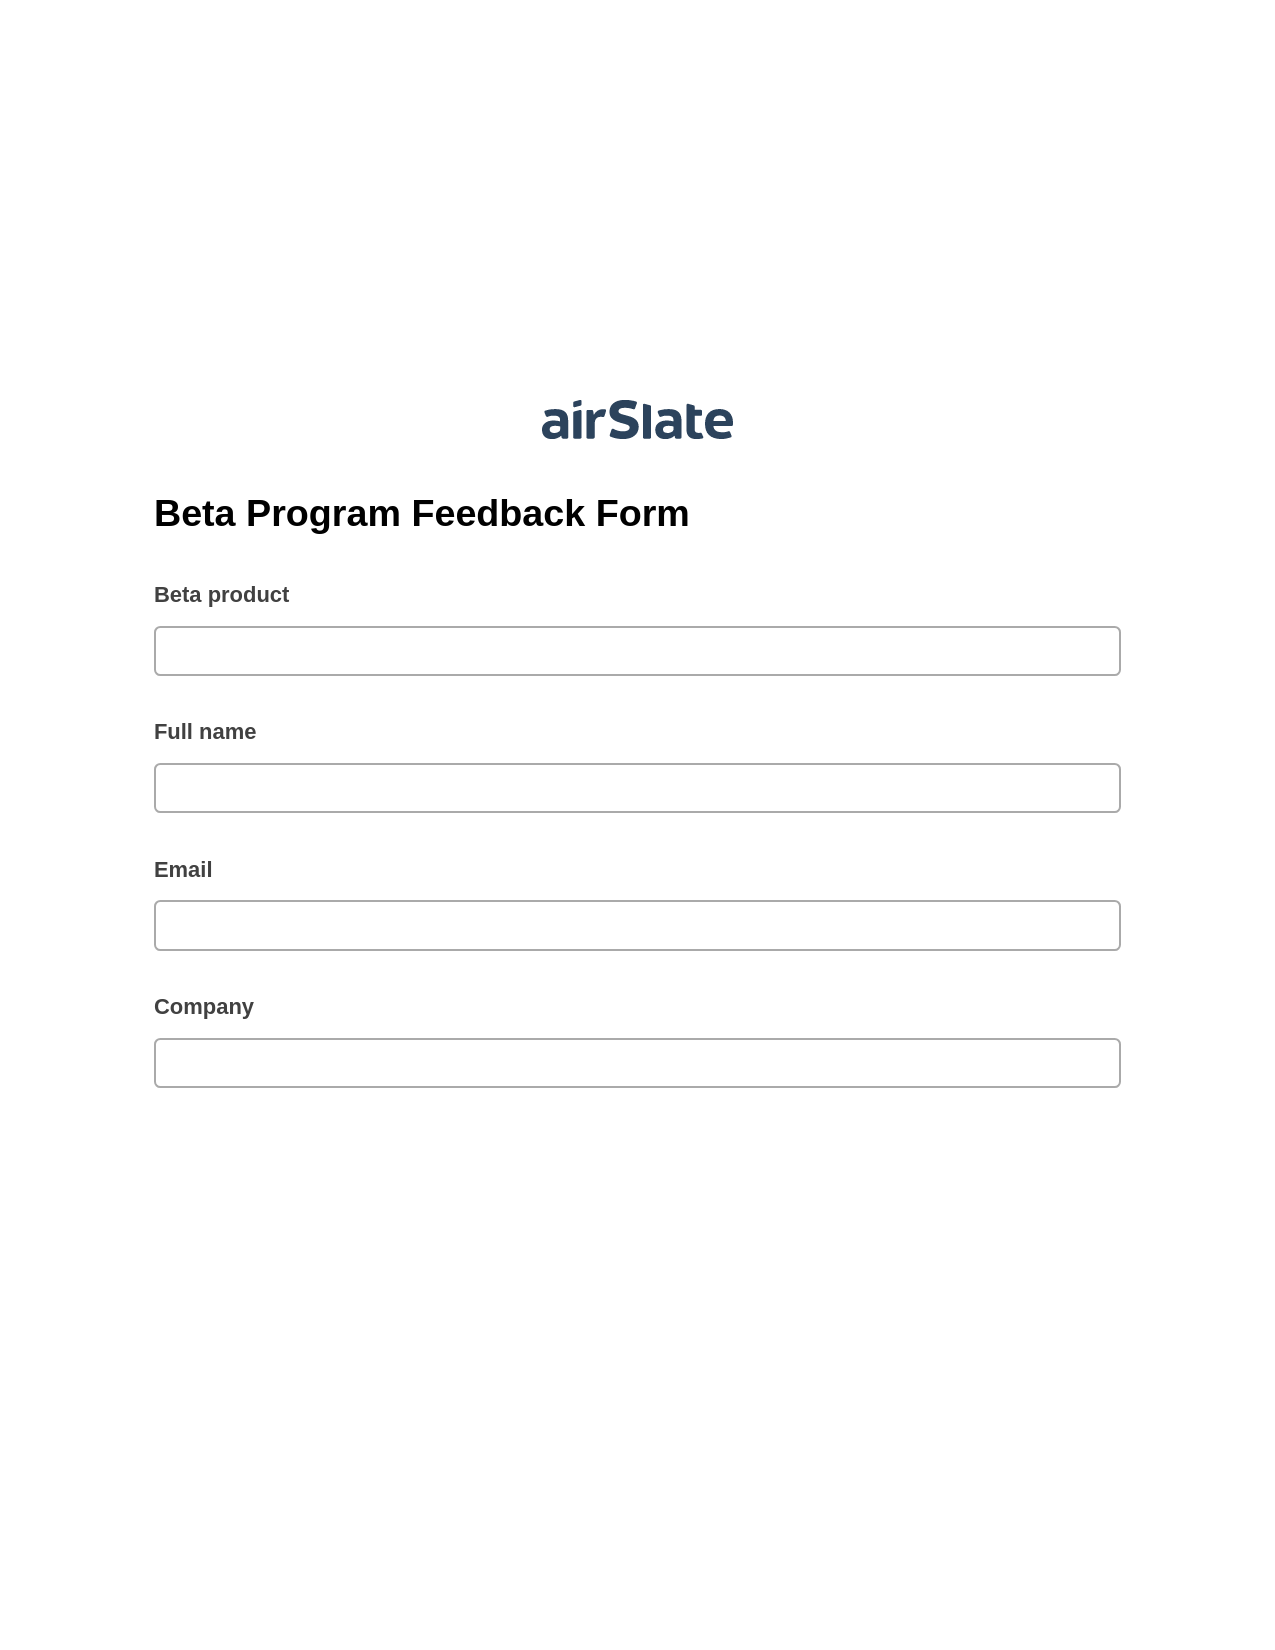 Beta Program Feedback Form Pre-fill Dropdowns from Google Sheet Bot, Remove Tags From Slate Bot, Export to Smartsheet